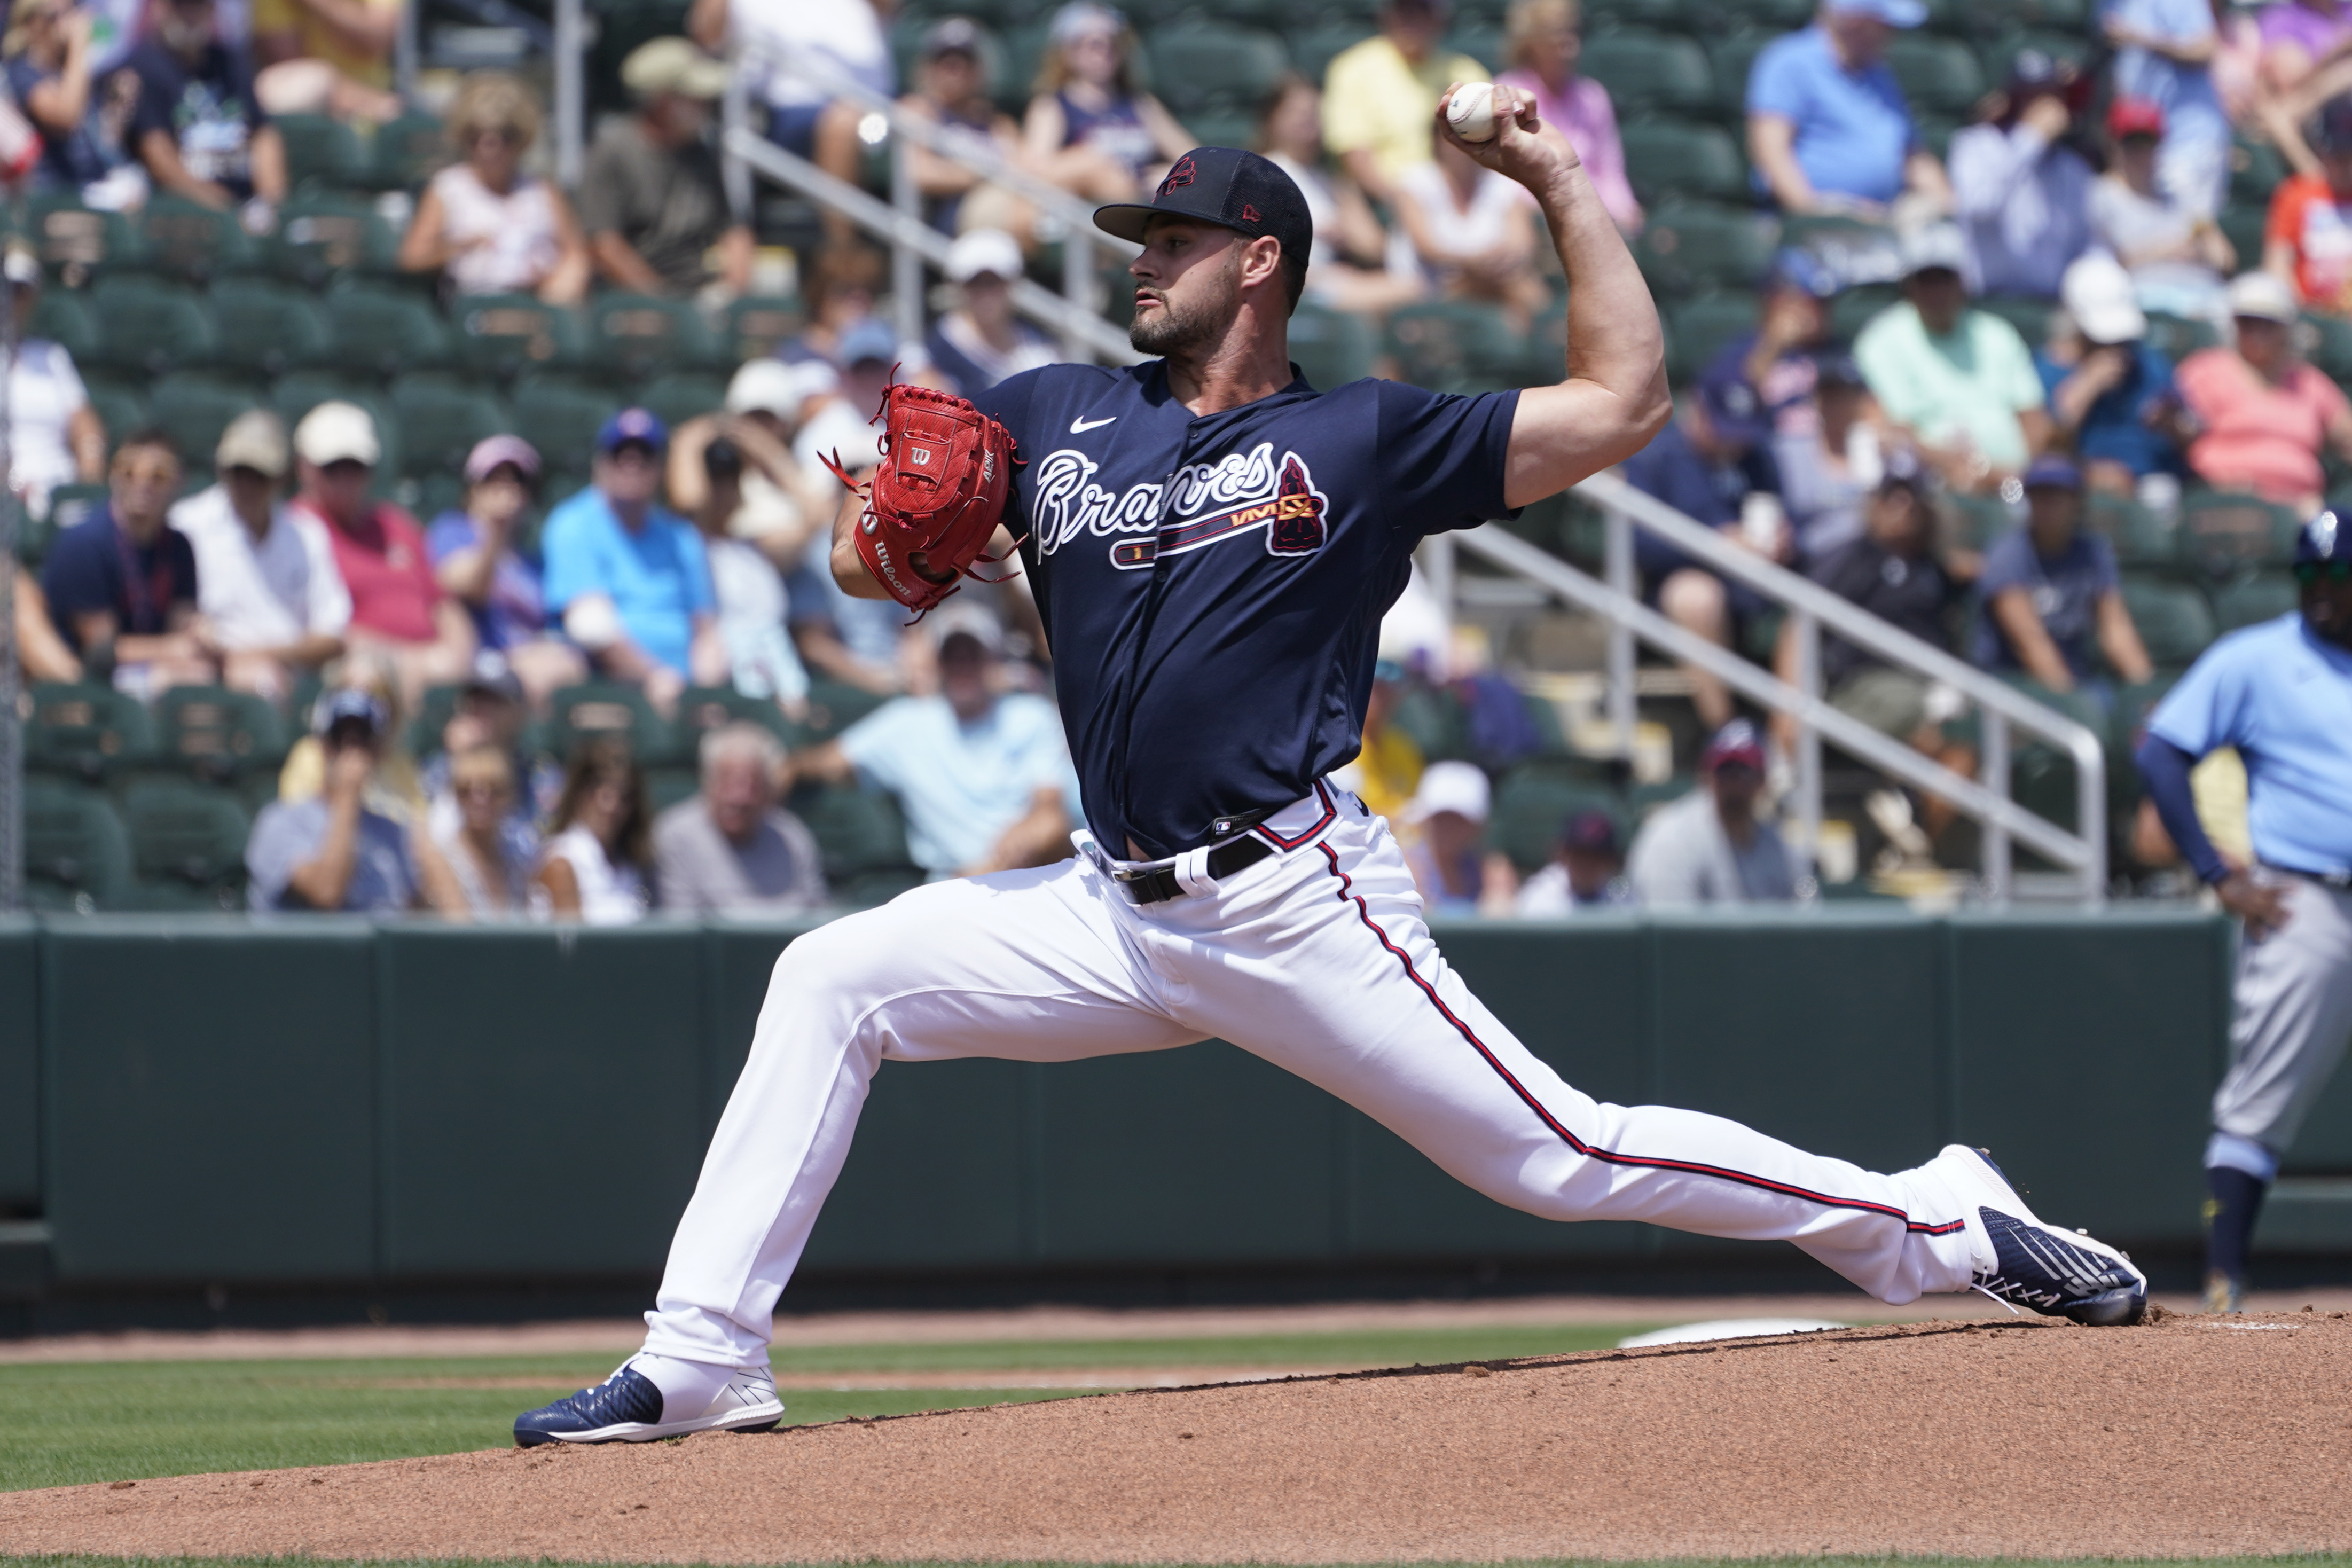 Atlanta Braves: Here are the scenes from Braves Spring Training